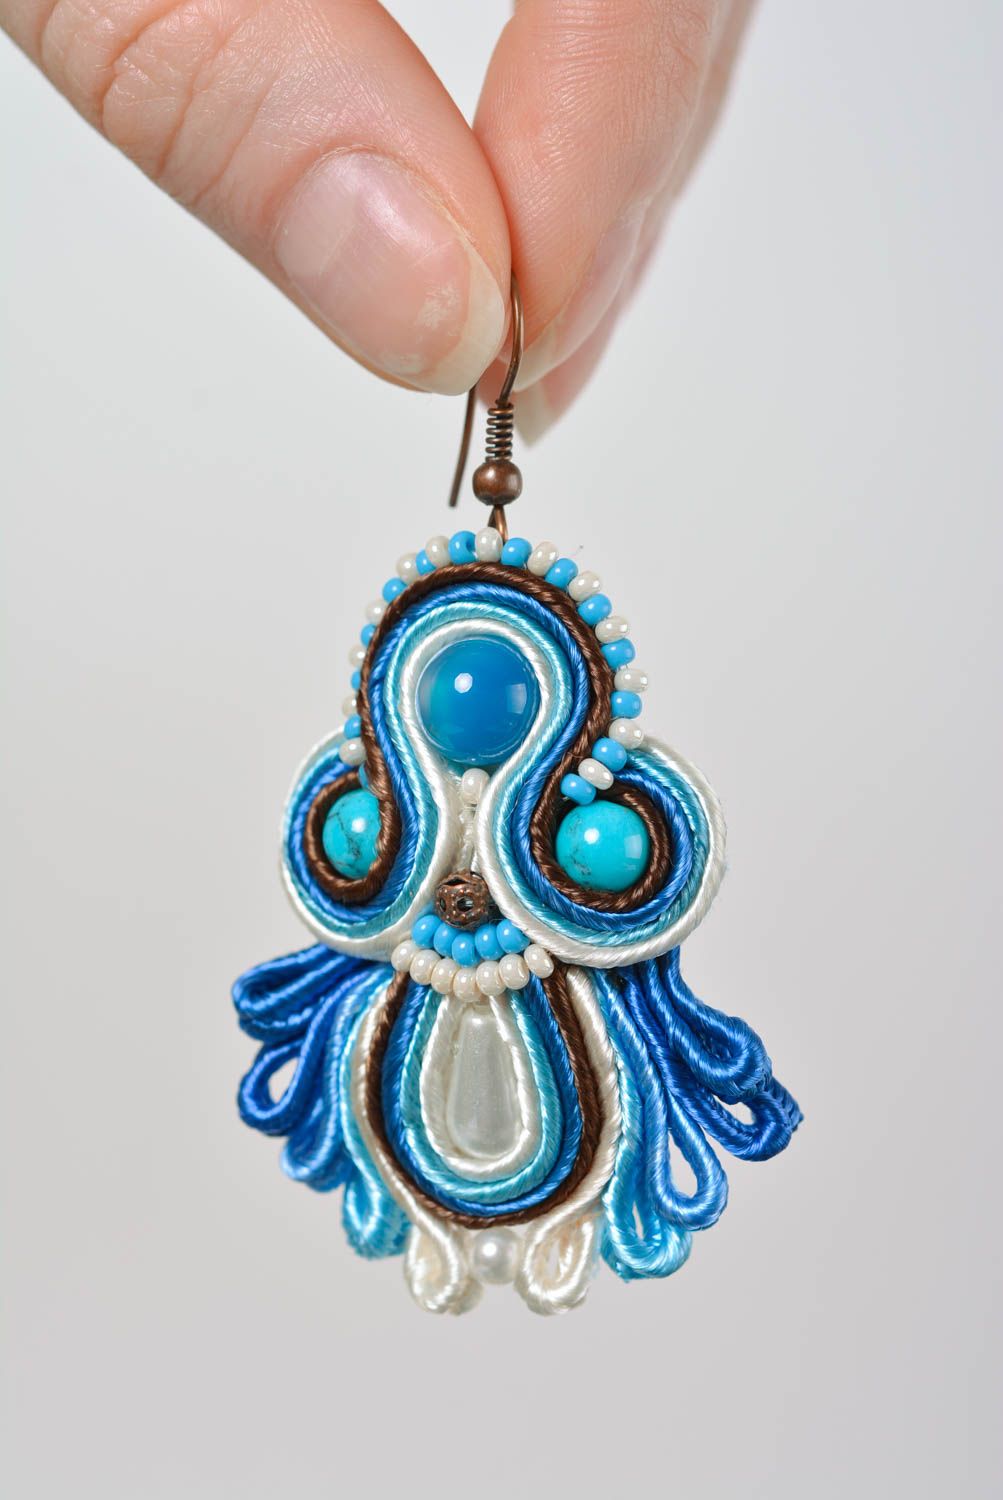 Handmade soutache jewelry soutache pendant and earrings accessories with stones photo 5